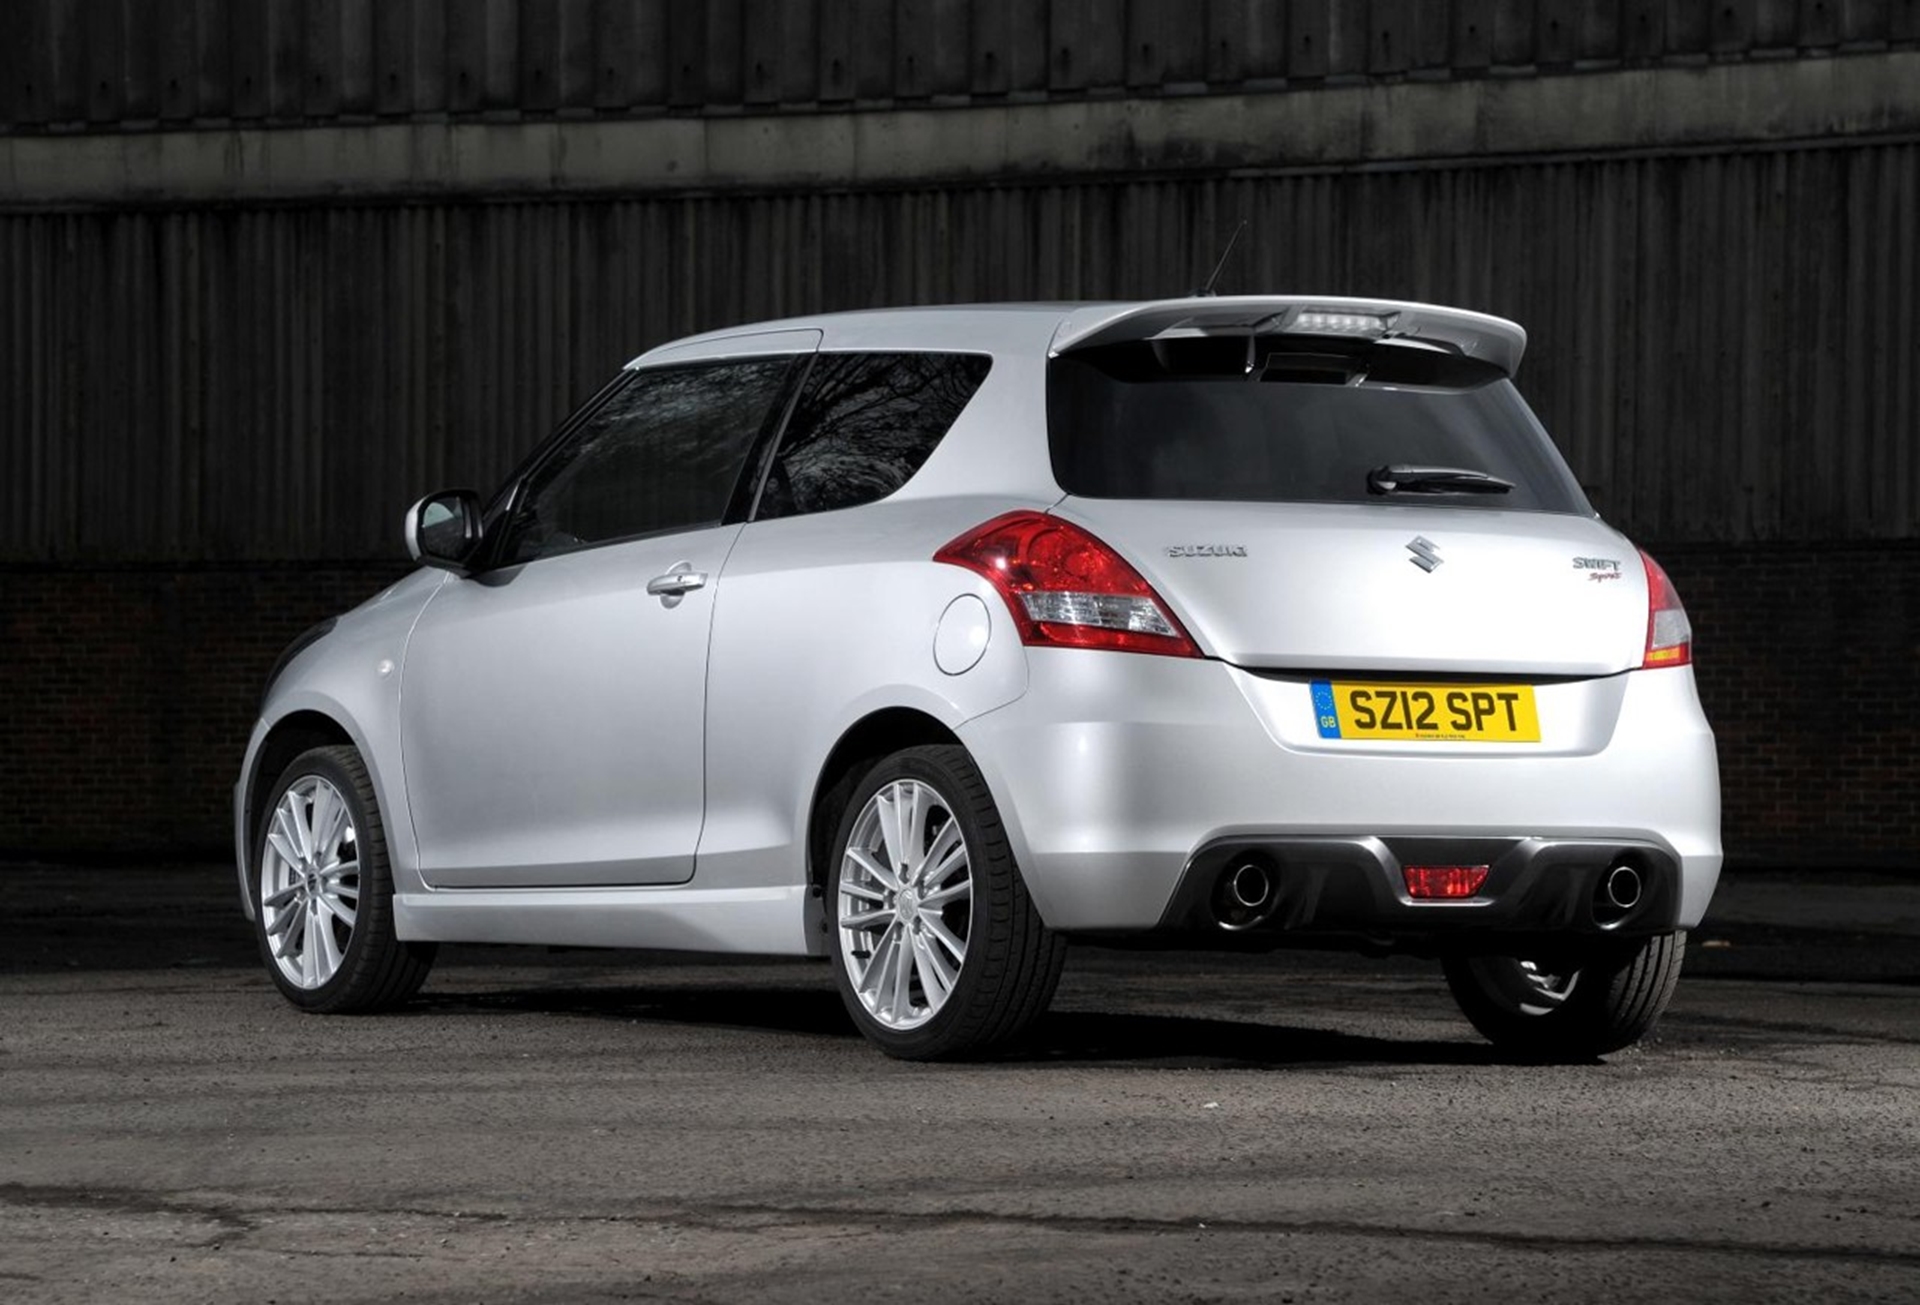 SWIFT SPORT – TOP RATED SPORTS CAR FROM CARBUYER.CO.UK